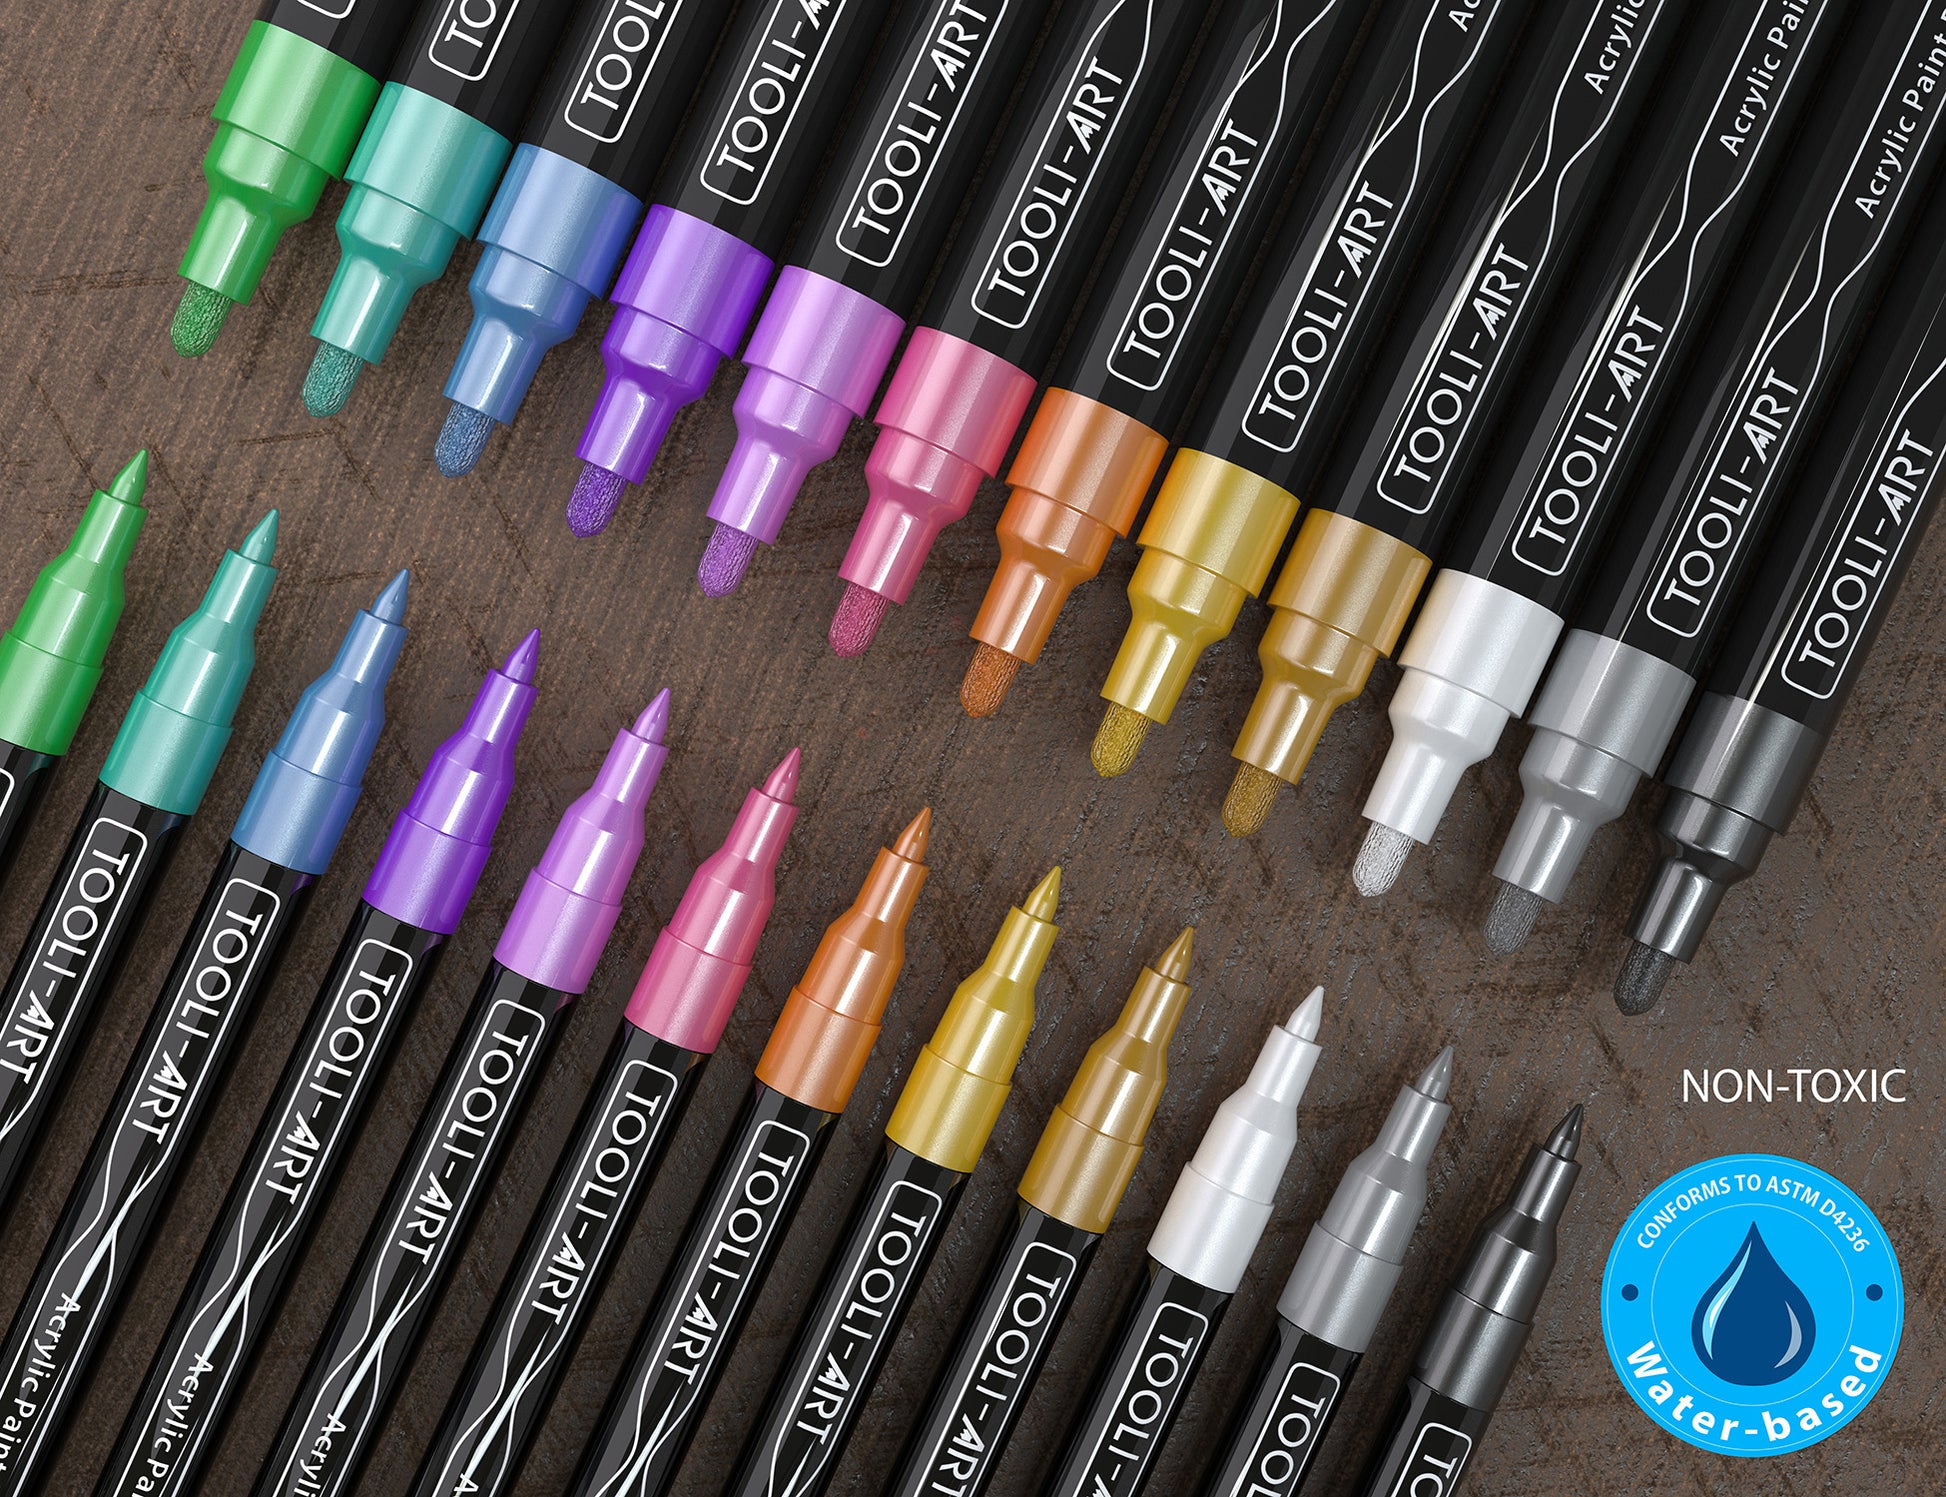 24 Pastel Acrylic Paint Pens by Tooli-Art - swatching, first impression  #adultcoloring 